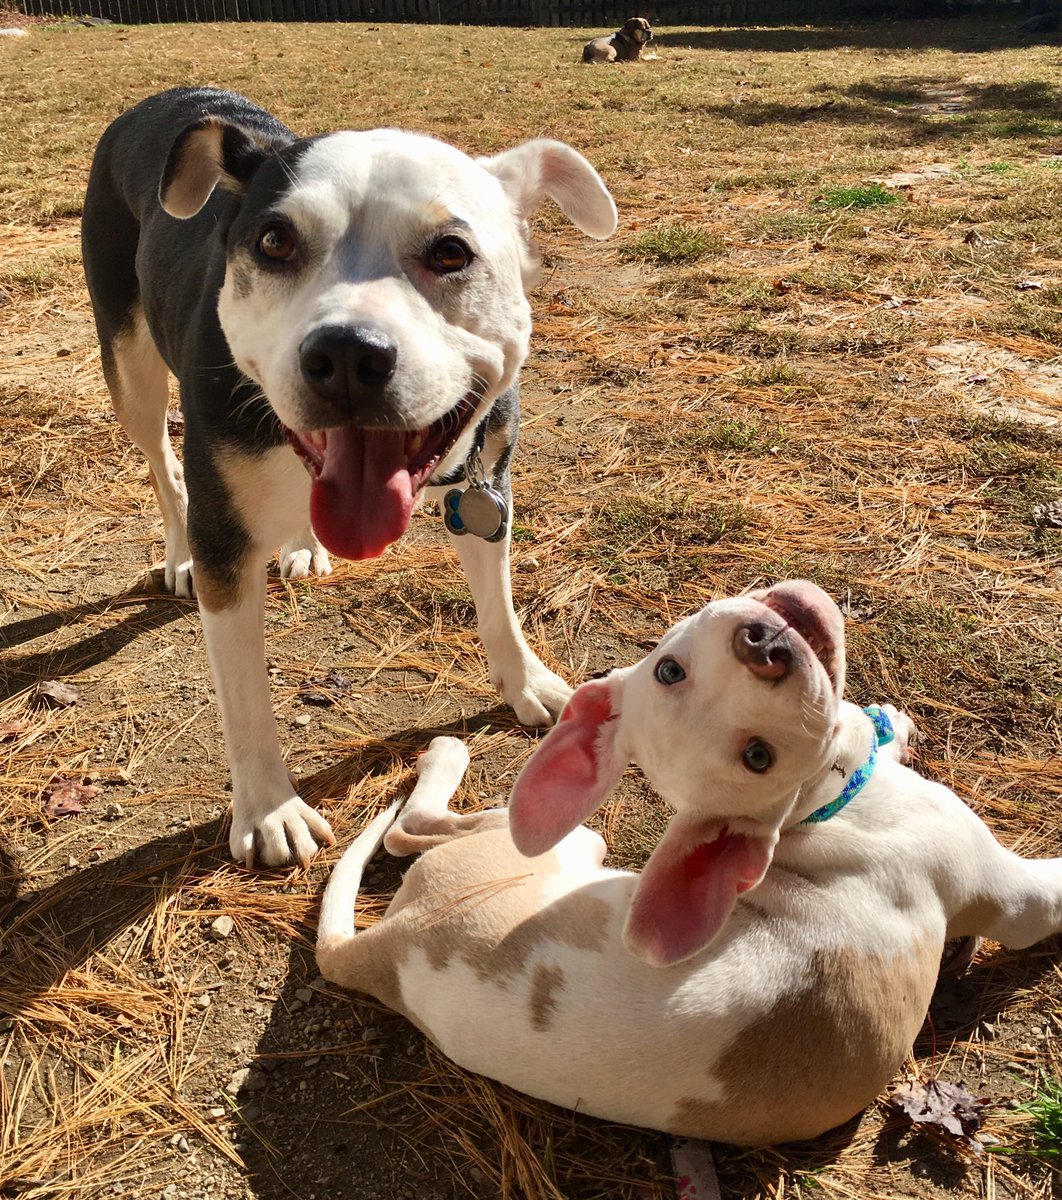 Panini, the adorable creature on the right, hanging with her foster brother Fezziwig! She will be available for adoption soon! And is perfect! #rescuedog #pittielove